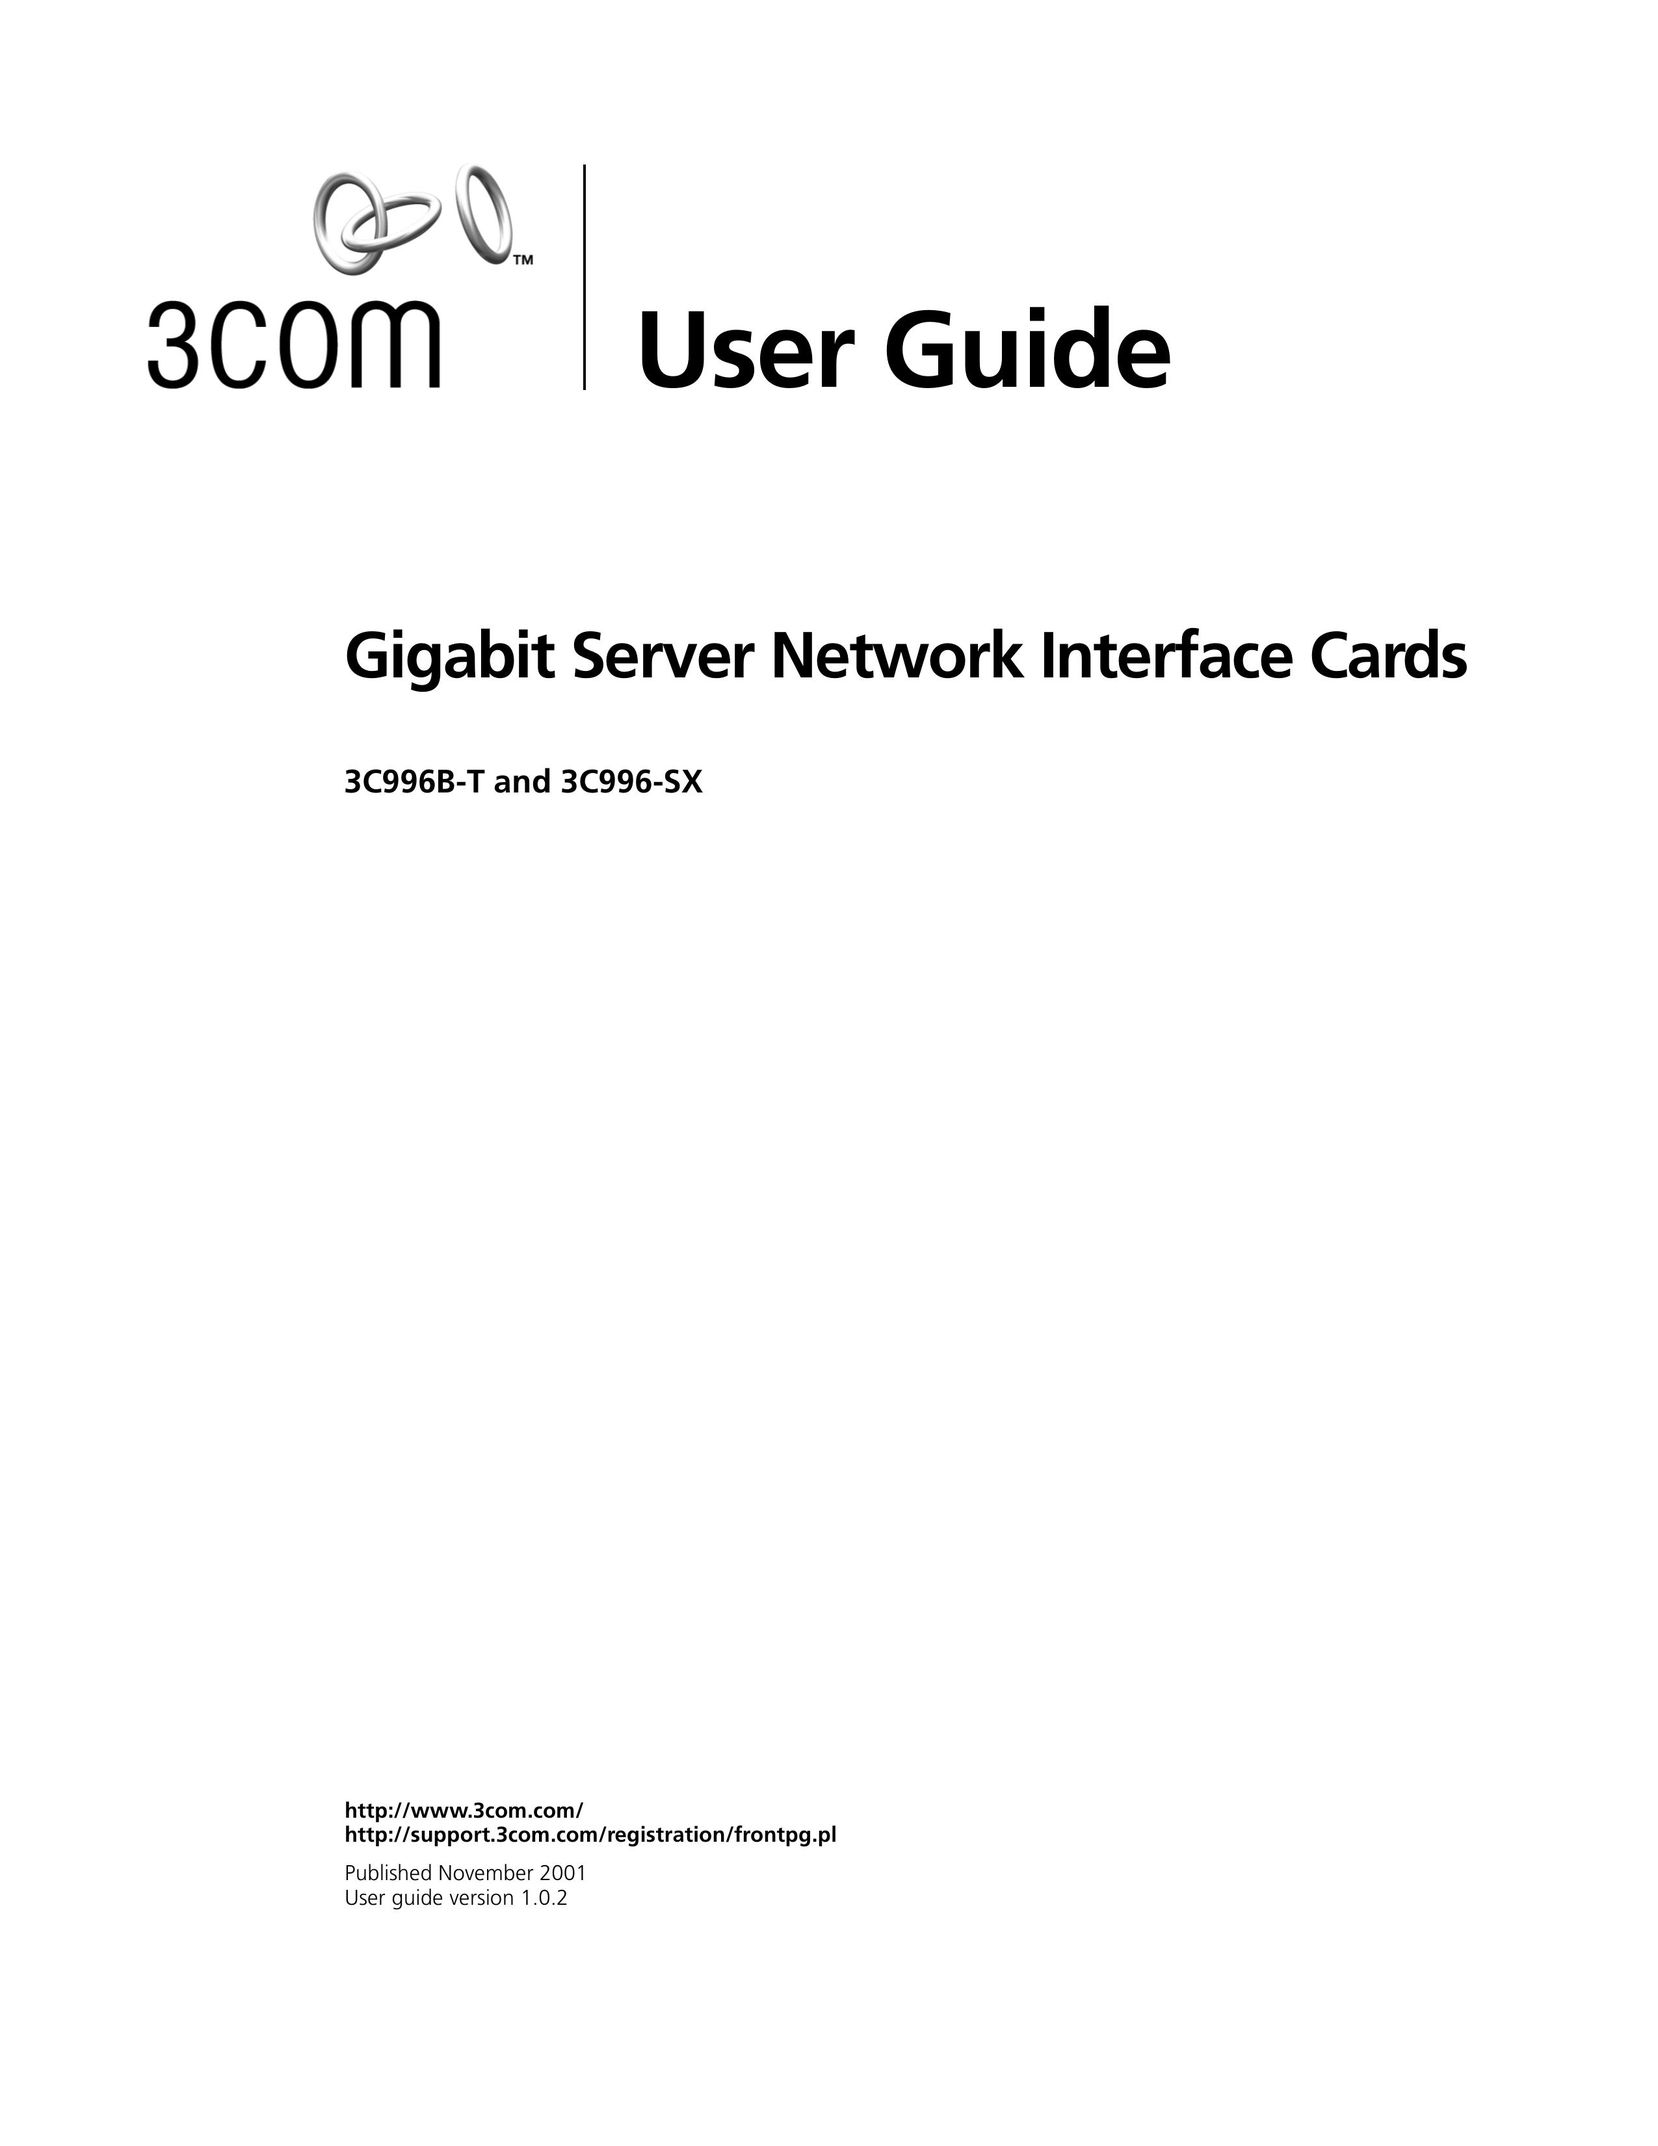 3Com 3C996B-T Network Card User Manual (Page 1)